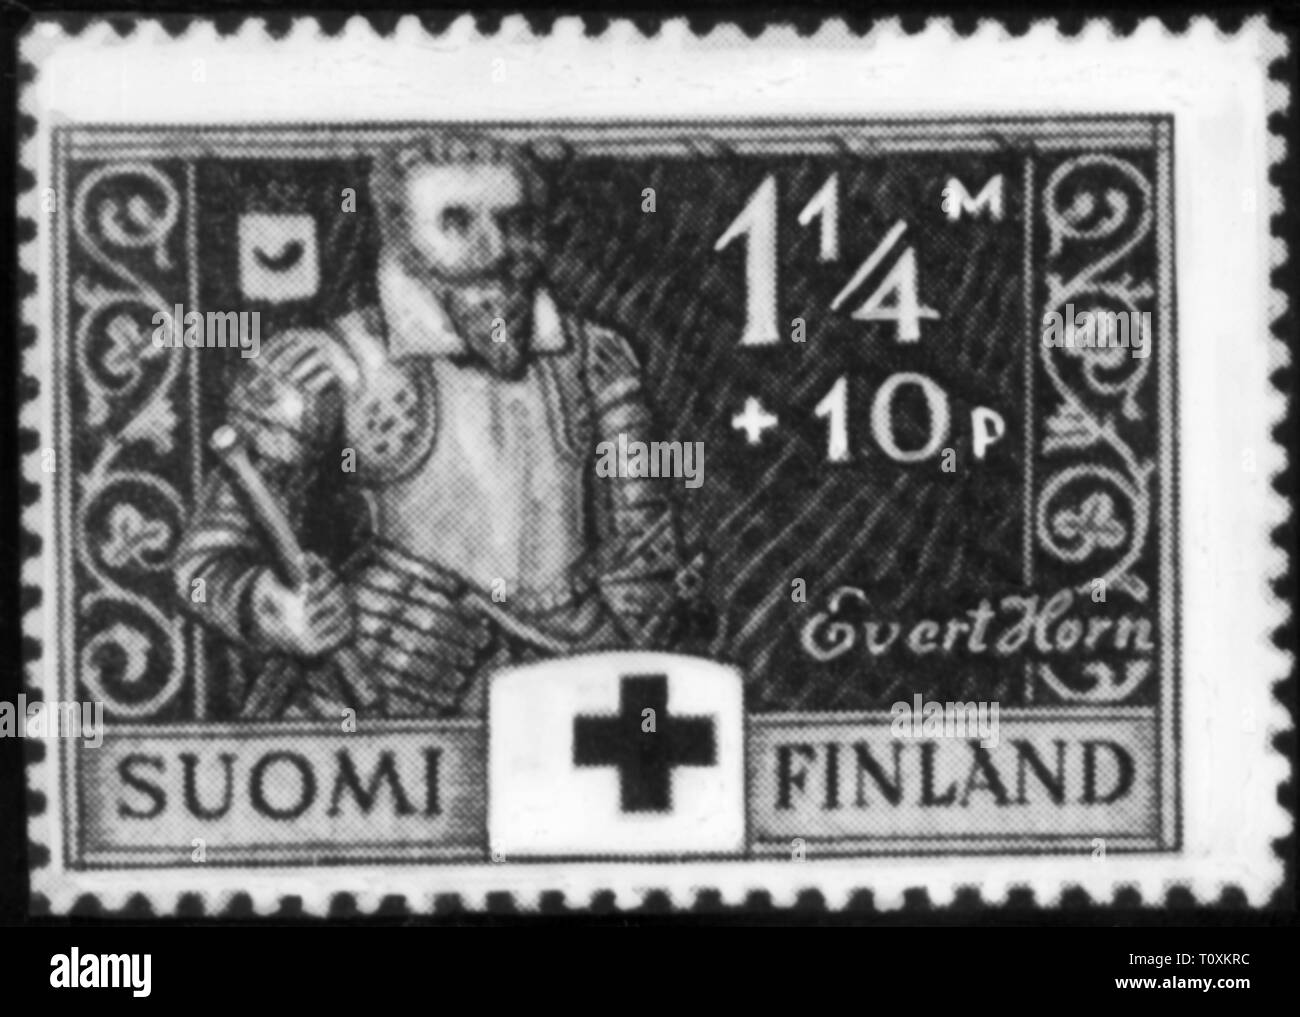 mail, postage stamps, Finland, 1 1/4 markka + 10 penniae special issue, in favour of the Red Cross, series Finnish war heroes, field marshal Evert Horn, date of issue: 20.1.1934 Evert Karlsson Horn af Kanckas, Swedish general, Finnish markka, Finnmark, pfennig, penny, Pfennigs, military, half length, people, 20th century, 1930s, mail, post, postage stamps, postage stamp, cross, crosses, historic, historical, pennia, penniä, Additional-Rights-Clearance-Info-Not-Available Stock Photo